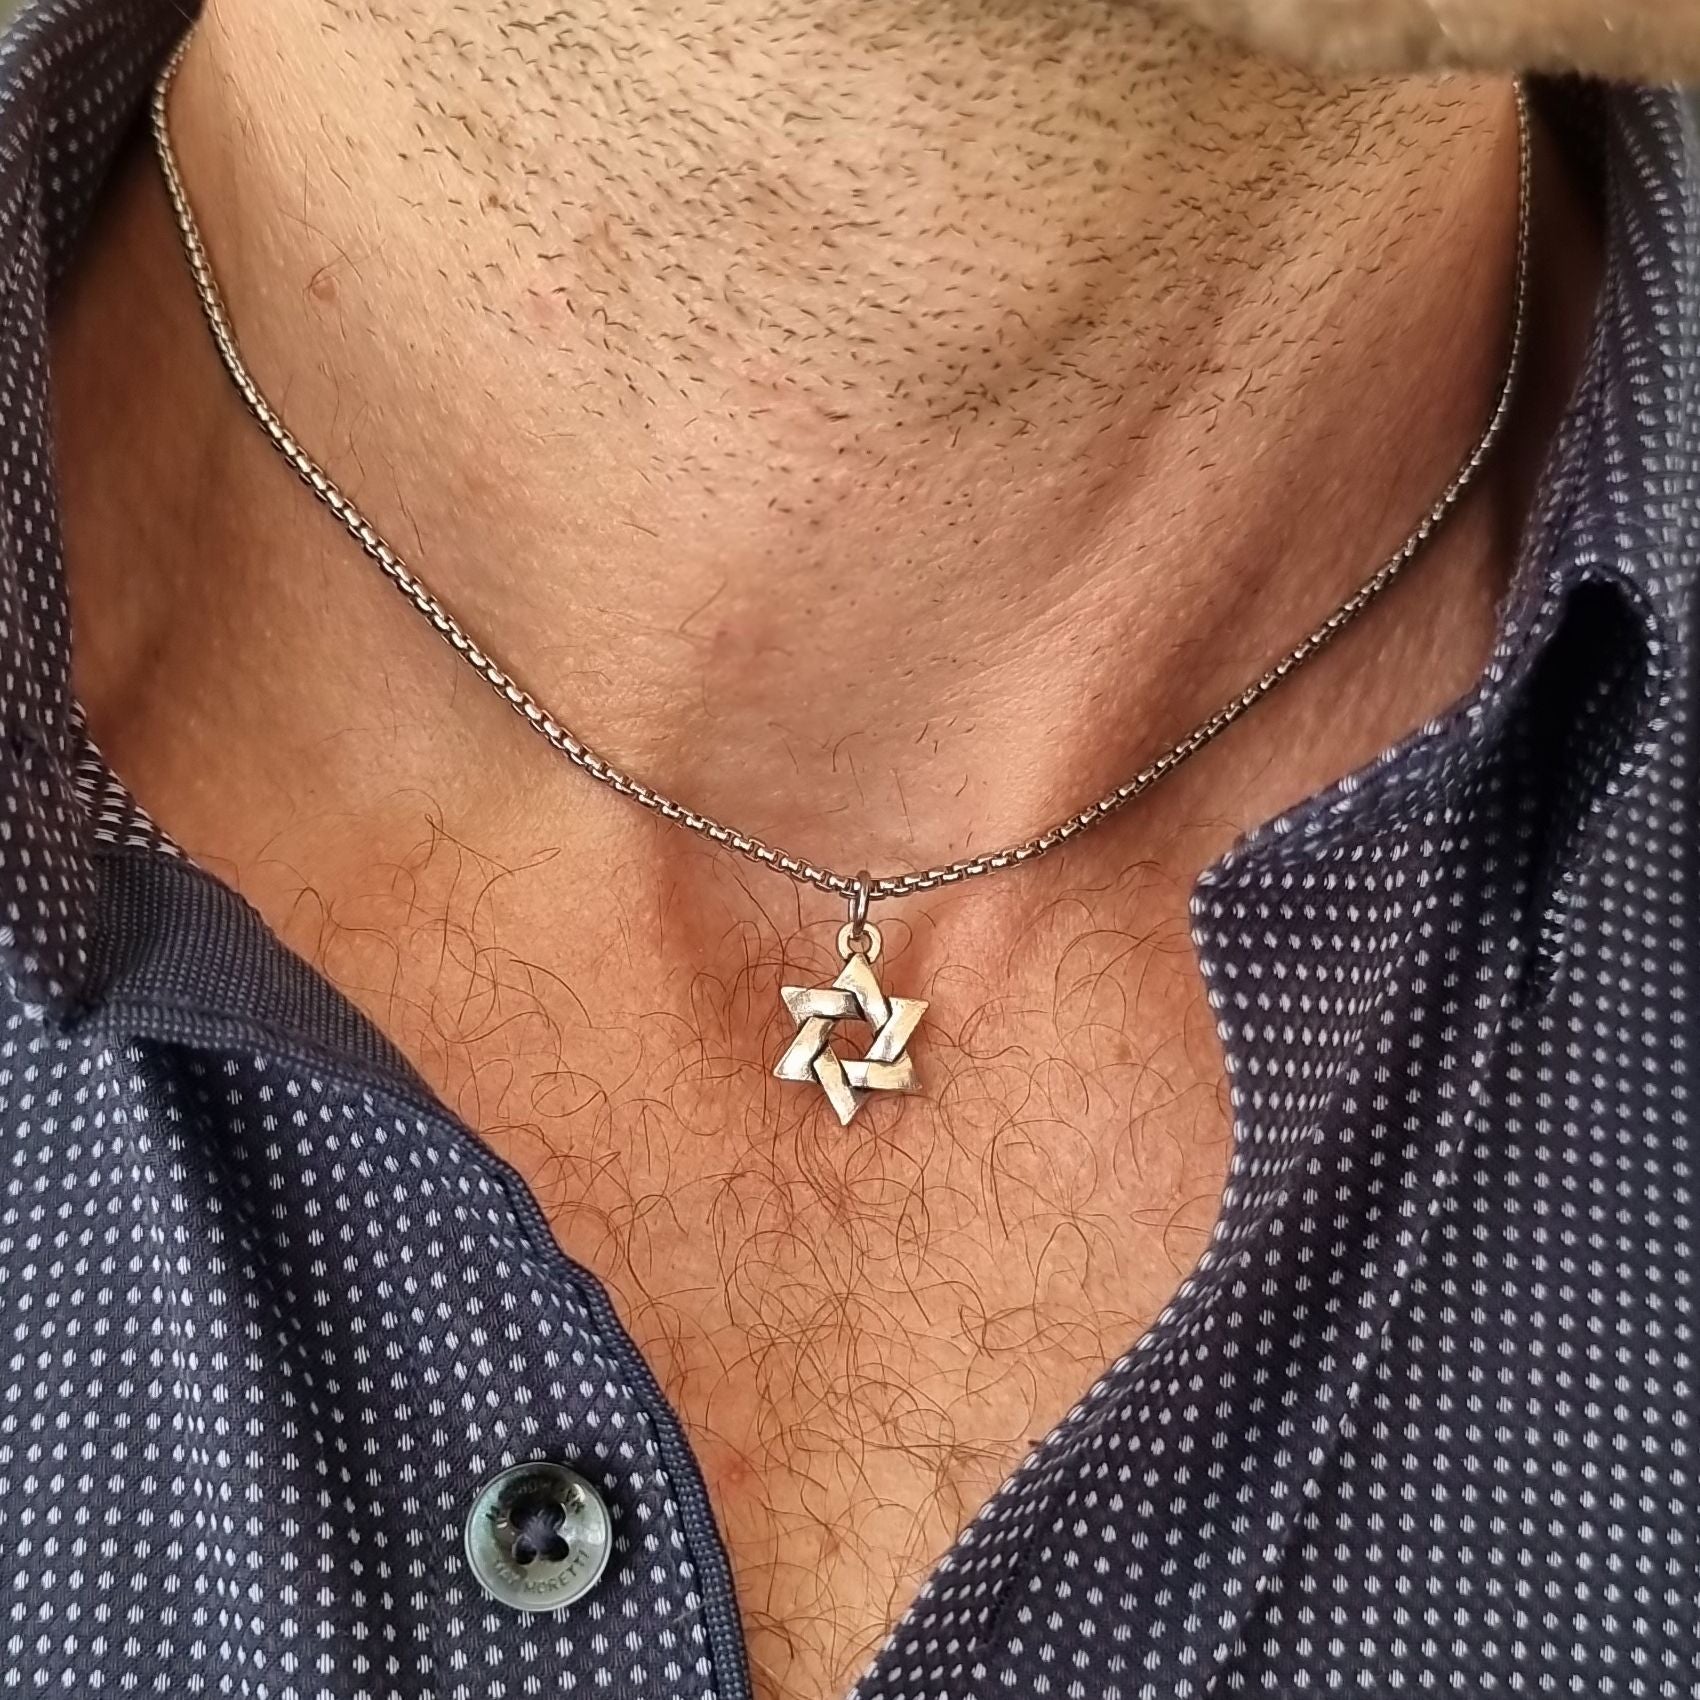 Buy Jewish Star Necklace Gold Magen David Necklace Men Jewish Star Necklace  and Birthstone Jewish Star Necklace for Men Online in India - Etsy